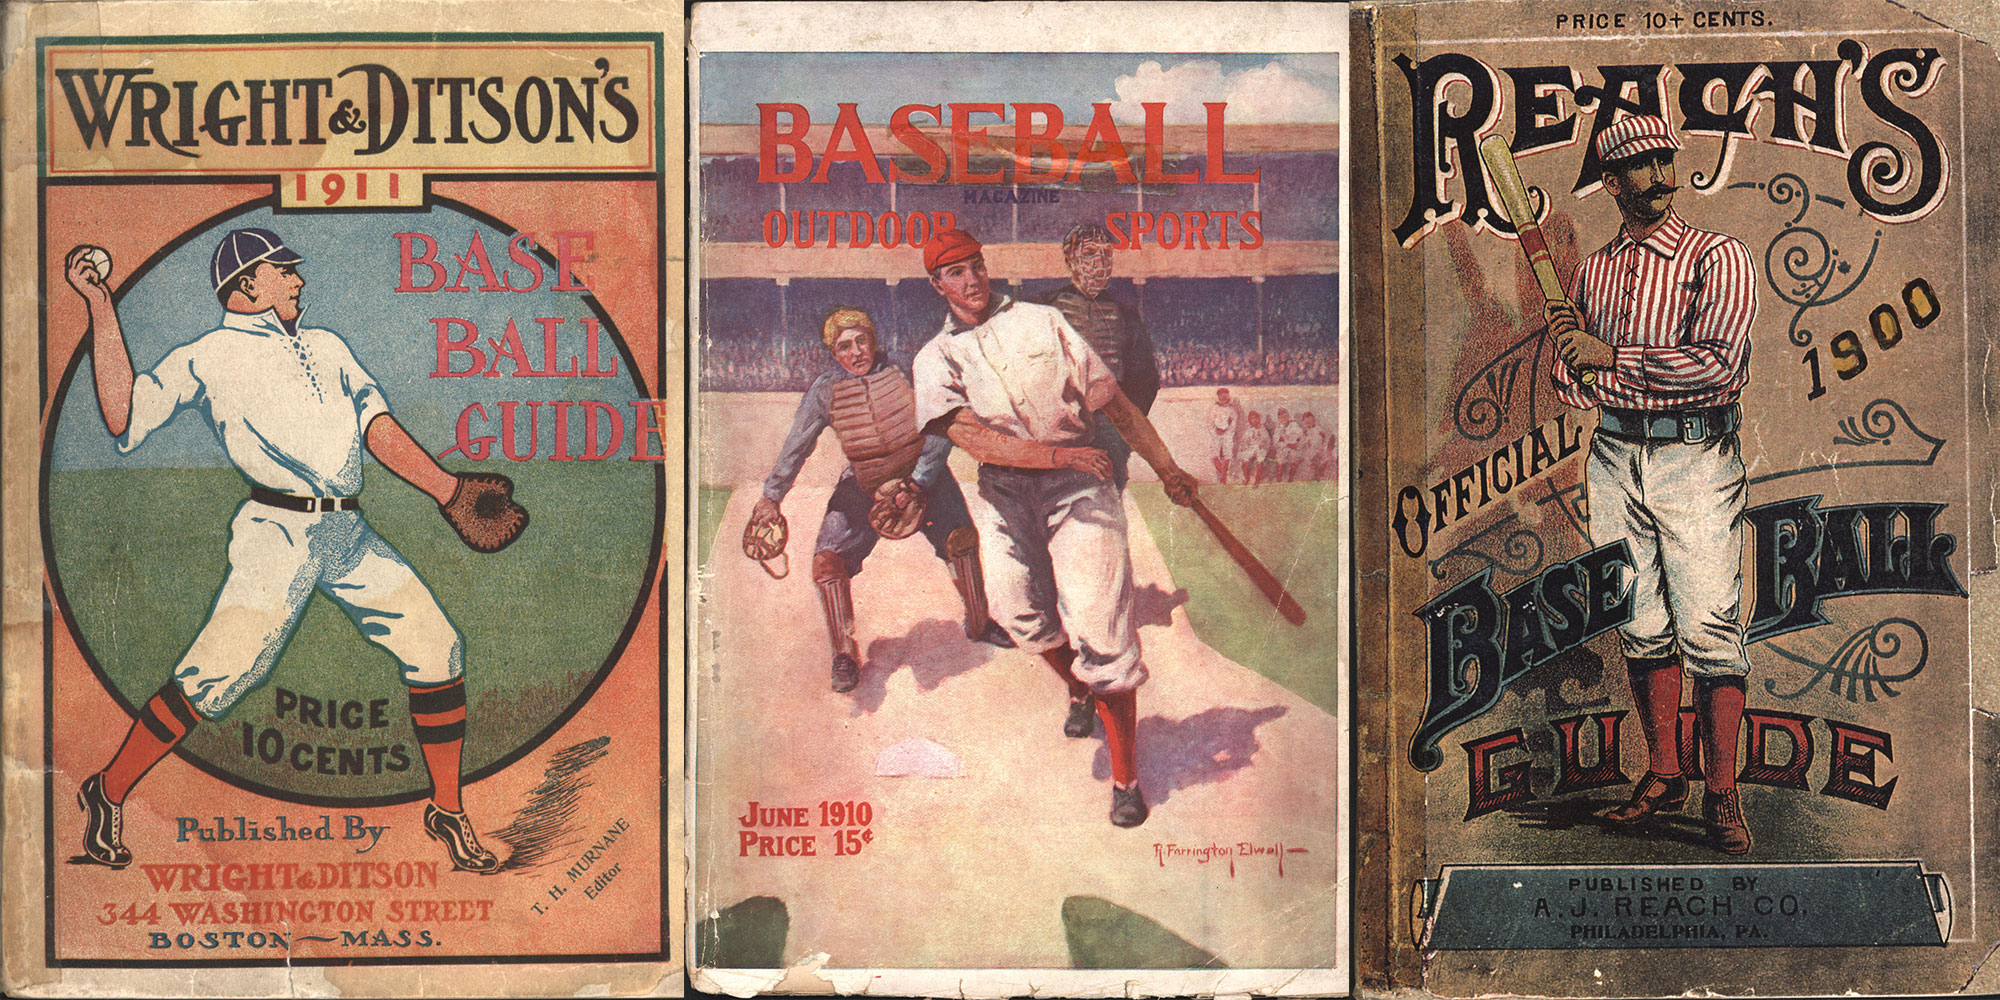 Baseball Magazines covers from 1900s.